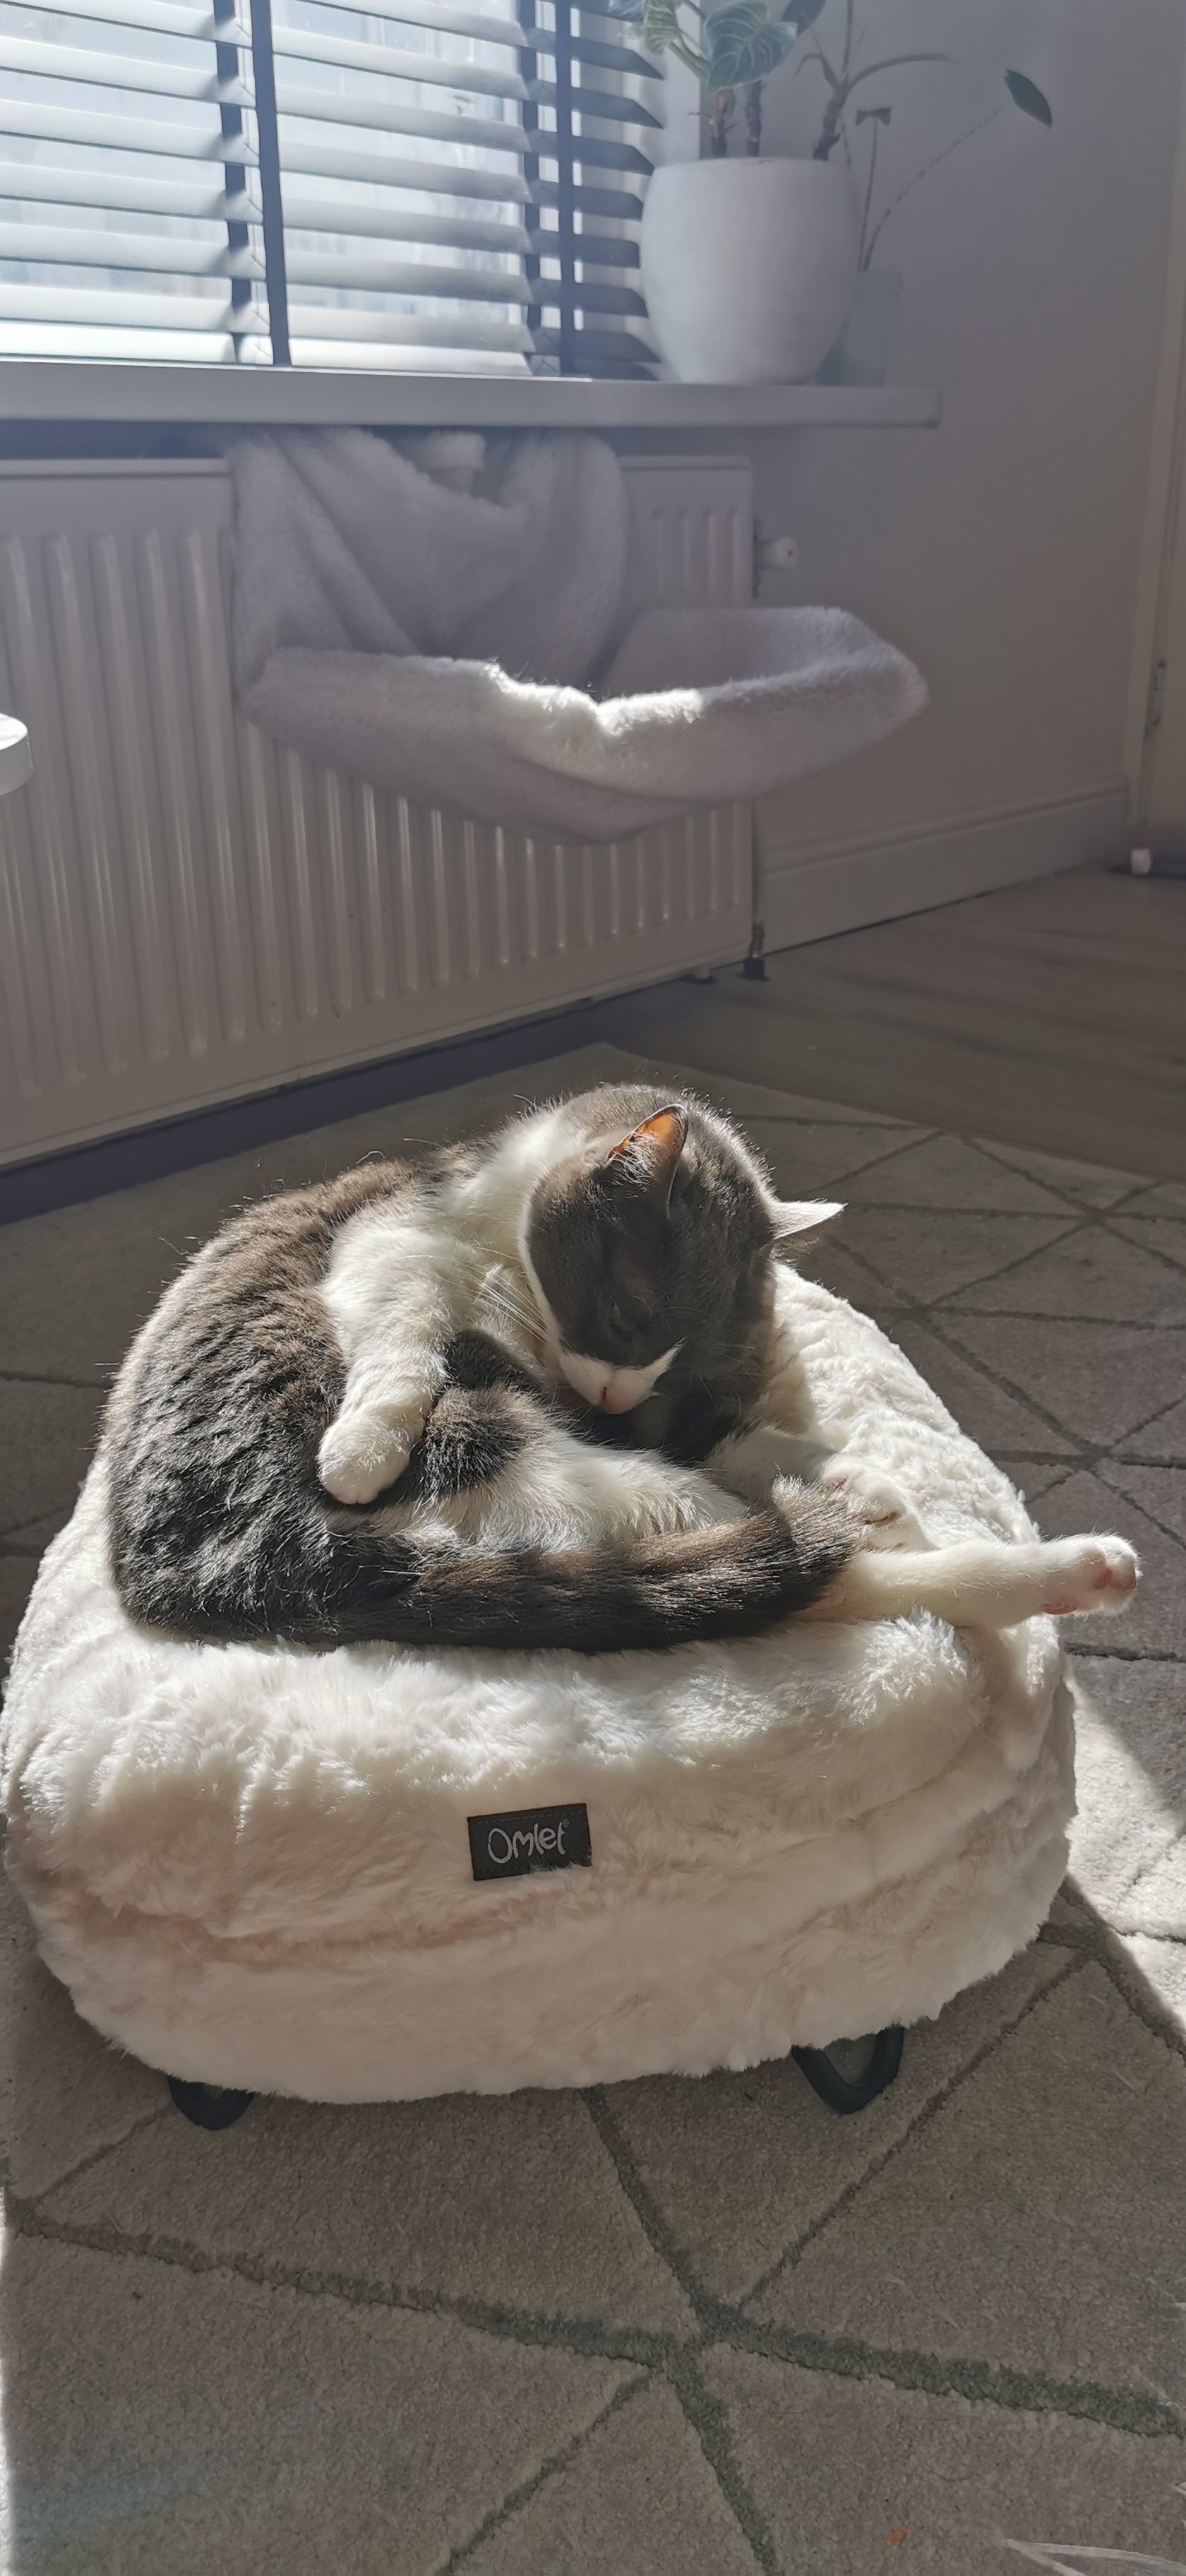 A cat grooming in his white donut shaped bed